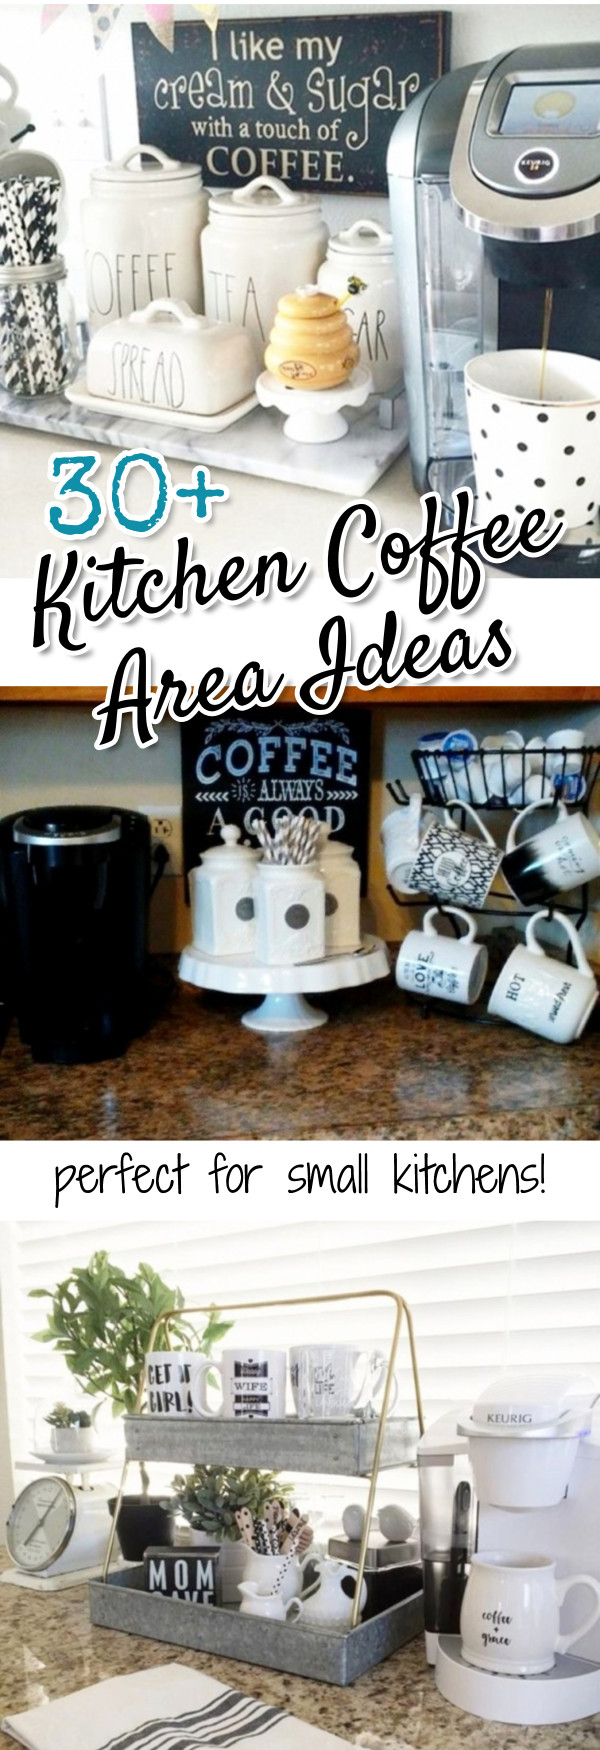 Gorgeous Kitchen Coffee Area Ideas we LOVE!  Perfect ideas for small kitchens, apartment kitchens, condo or lakehouse kitchens - and even as a dorm room coffee bar set up #homedecorideas #diyhomedecor